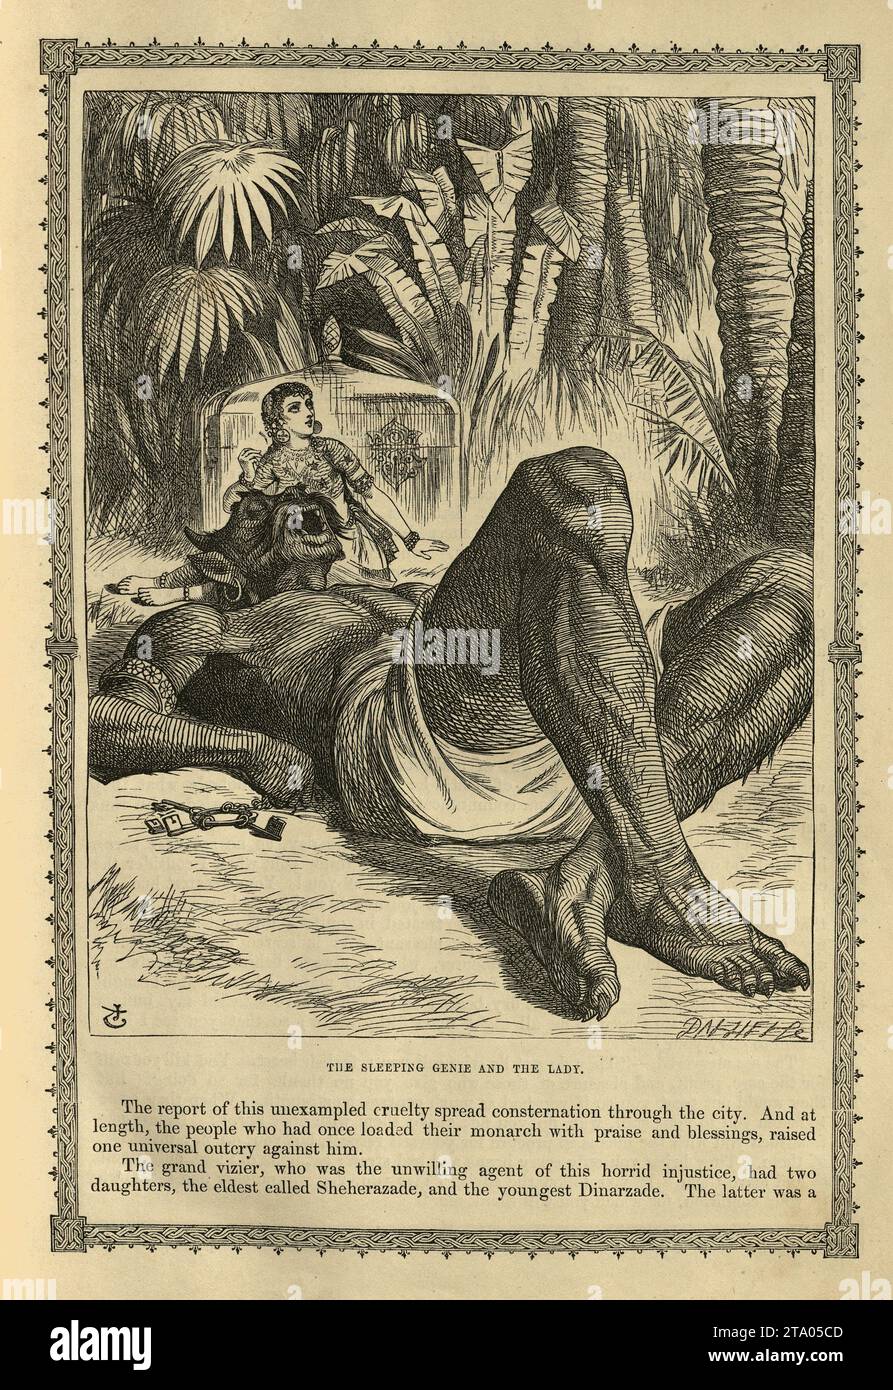 Vintage illustration One Thousand and One Nights, The sleeping genie and the lady, Middle Eastern folktales, by The Brothers Dalziel Stock Photo